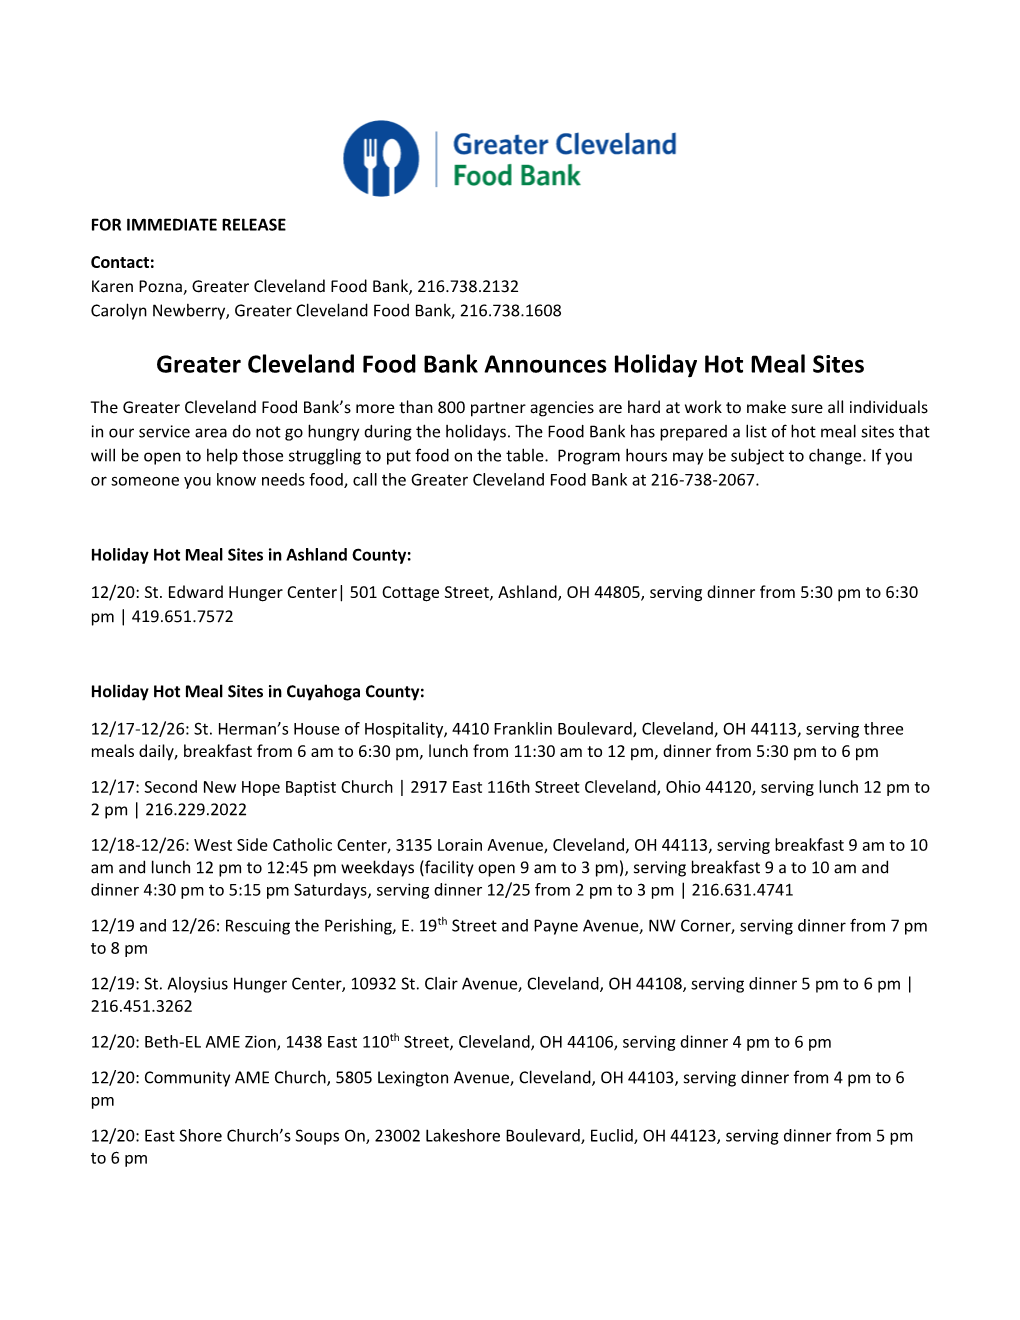 Greater Cleveland Food Bank Announces Holiday Hot Meal Sites